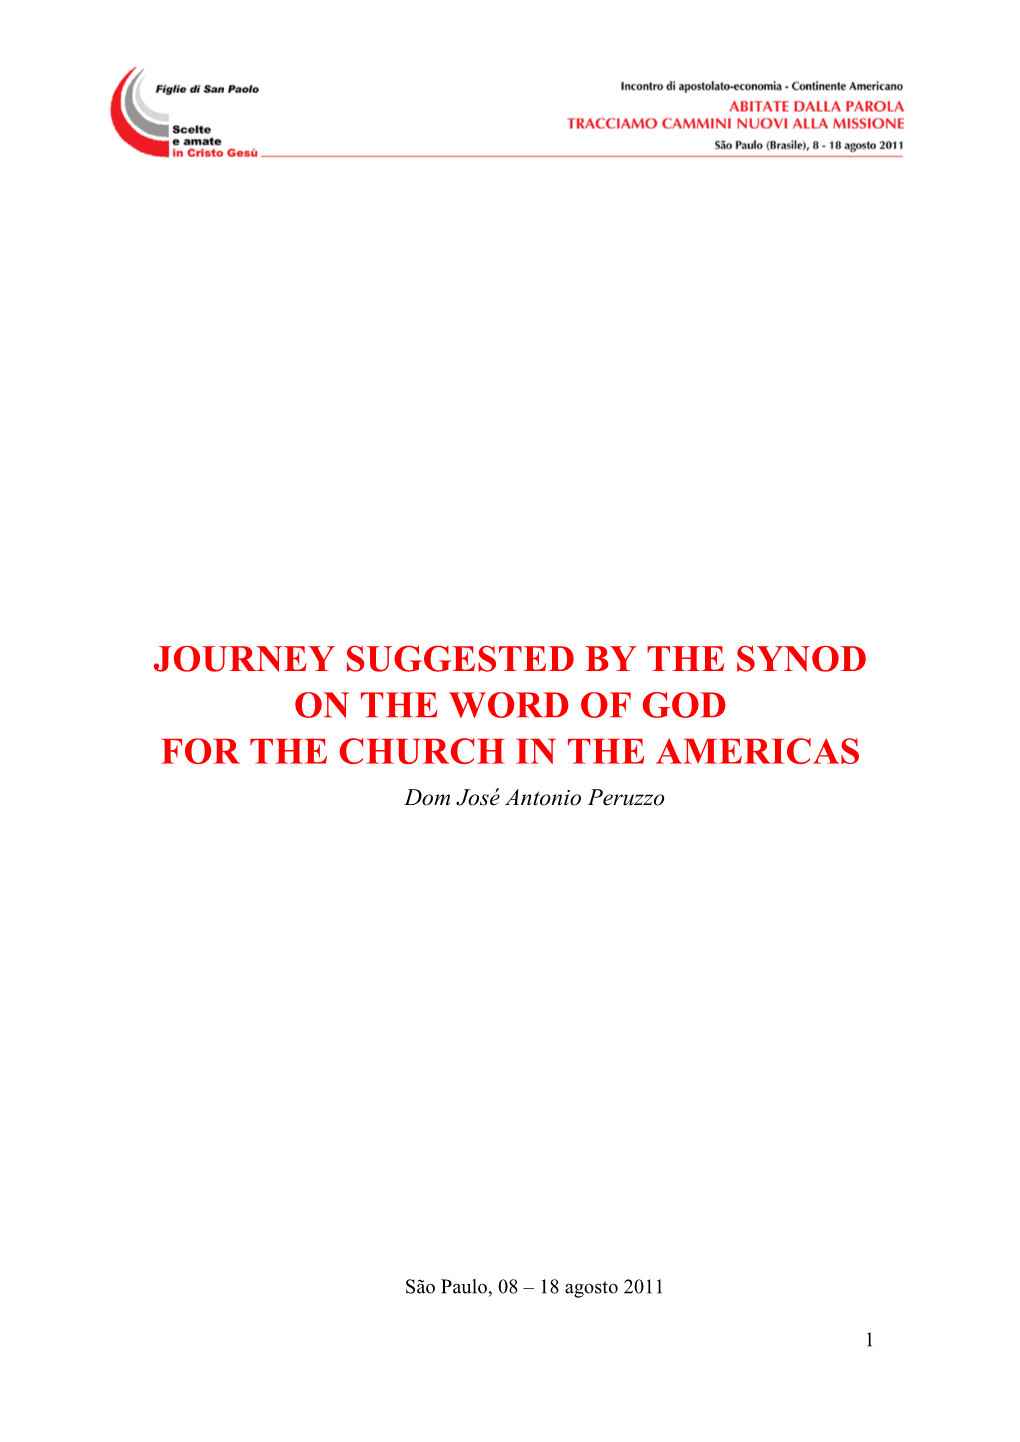 JOURNEY SUGGESTED by the SYNOD on the WORD of GOD for the CHURCH in the AMERICAS Dom José Antonio Peruzzo